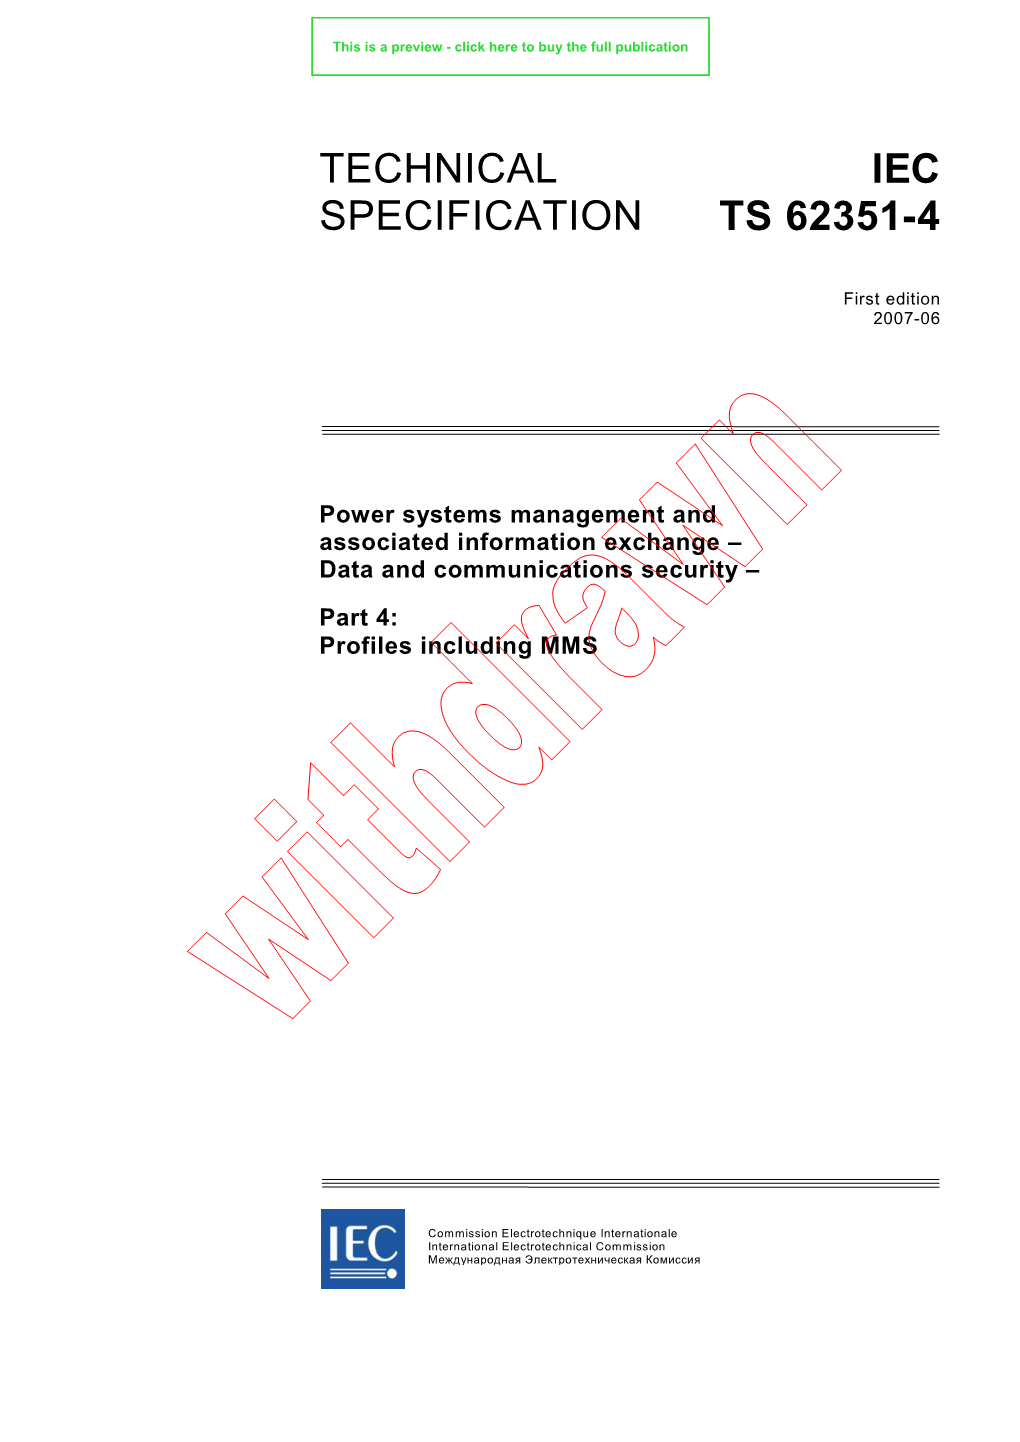 Technical Specification Iec Ts 62351-4